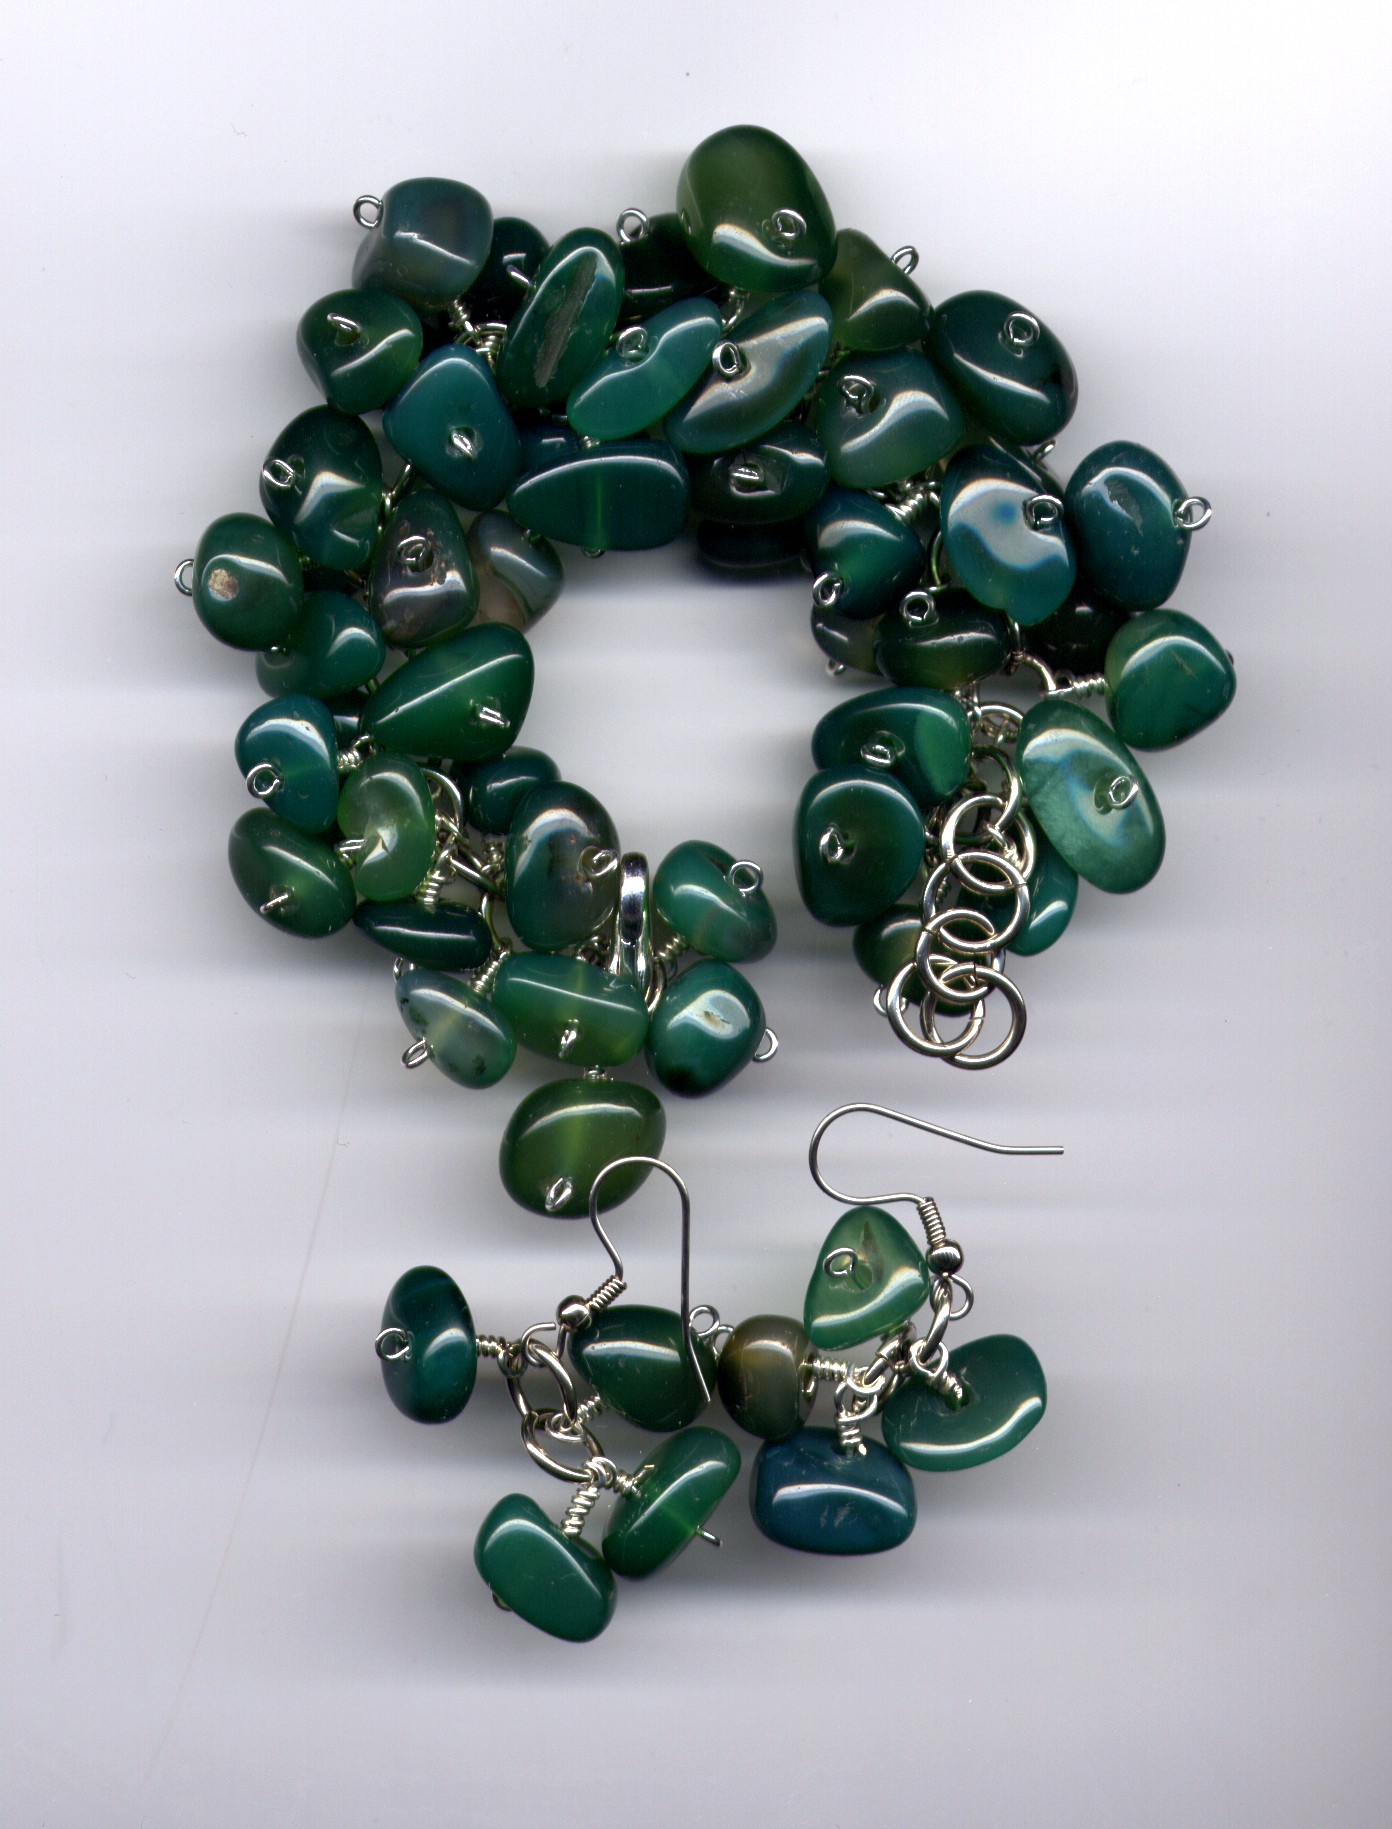 Wired Enchantments - Bracelet Styles